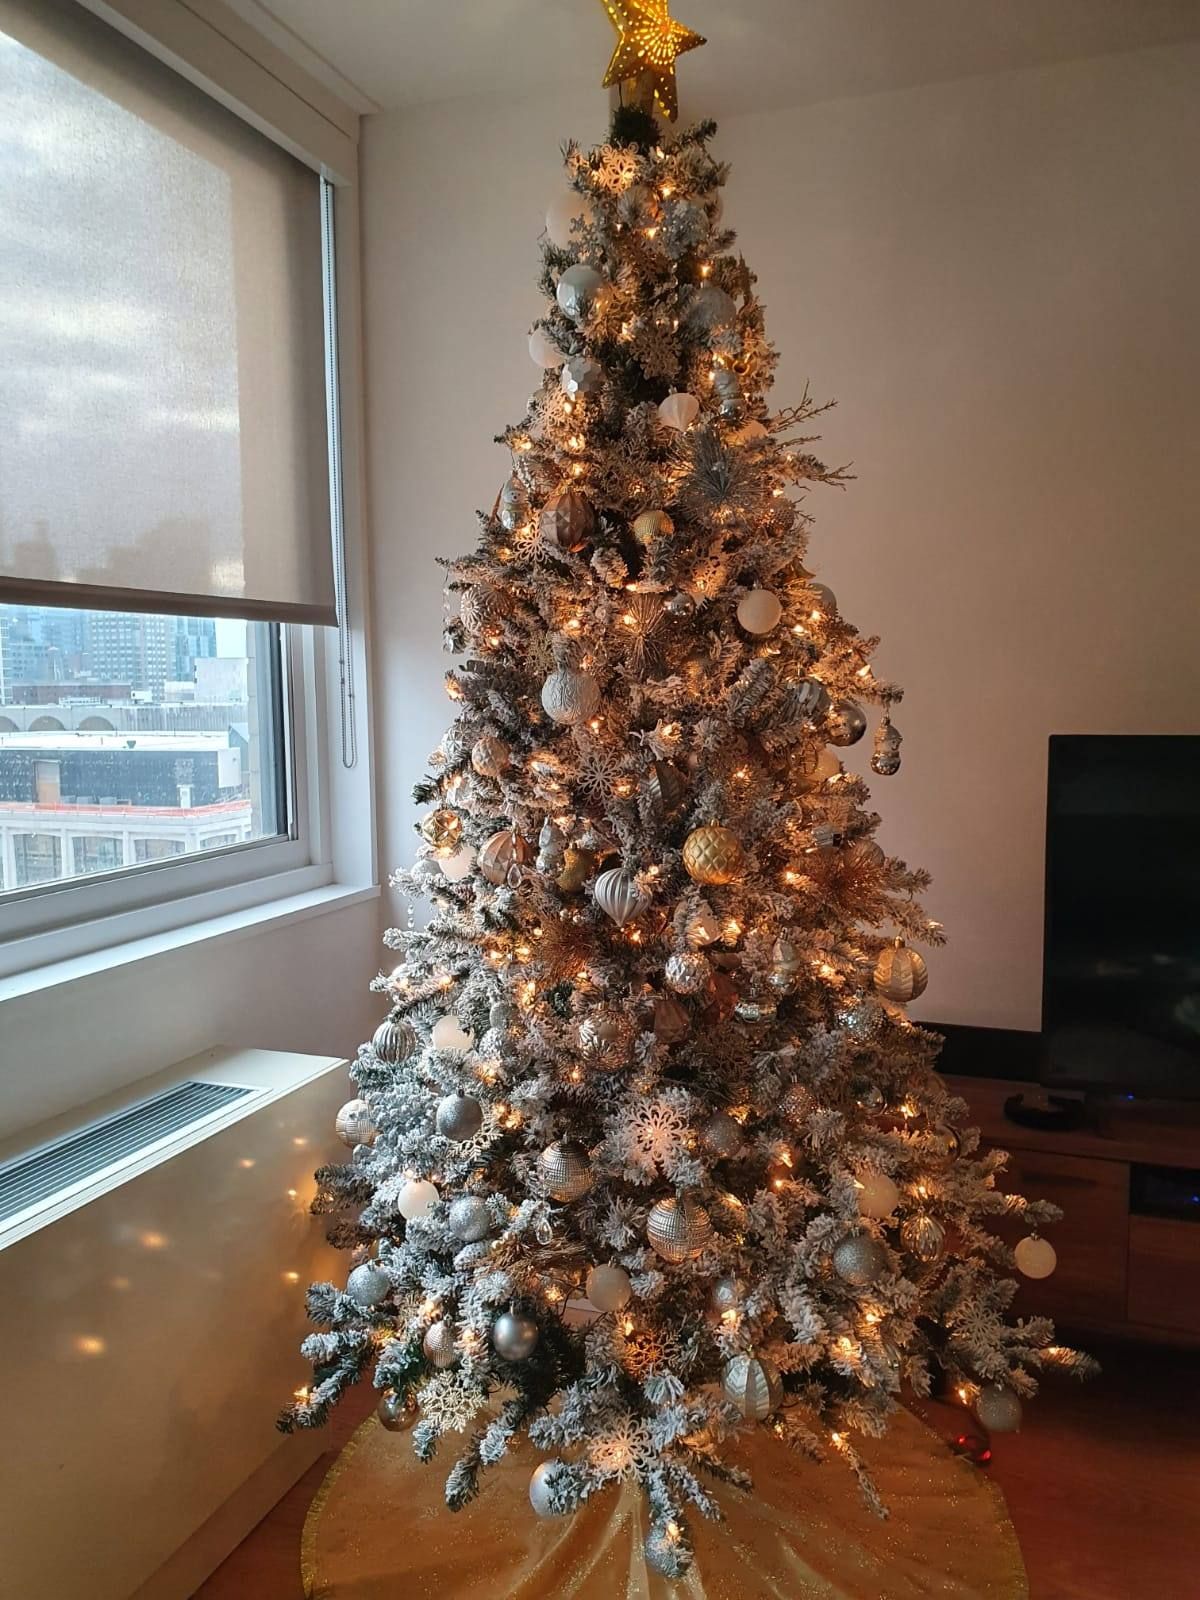 A decorated flocked Christmas tree in living room